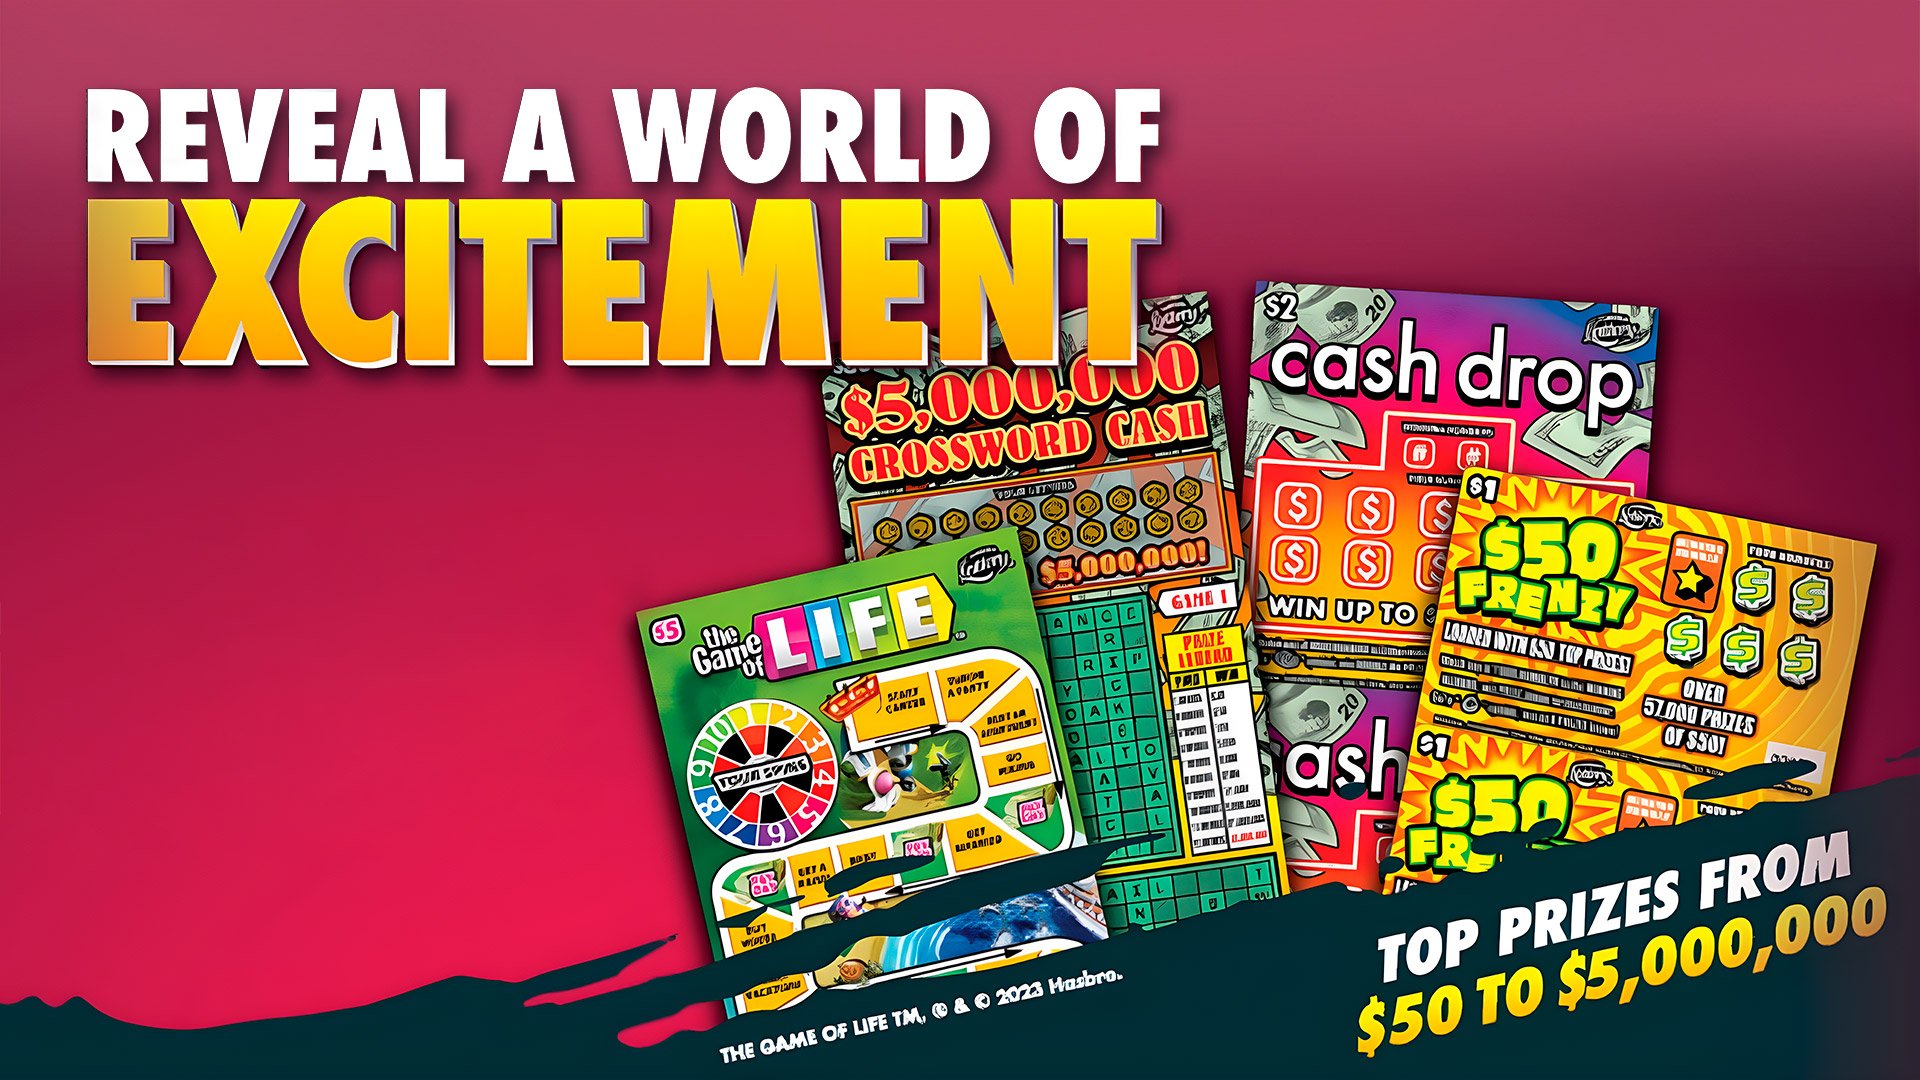 Florida Lottery introduces four new scratch off games featuring $345M